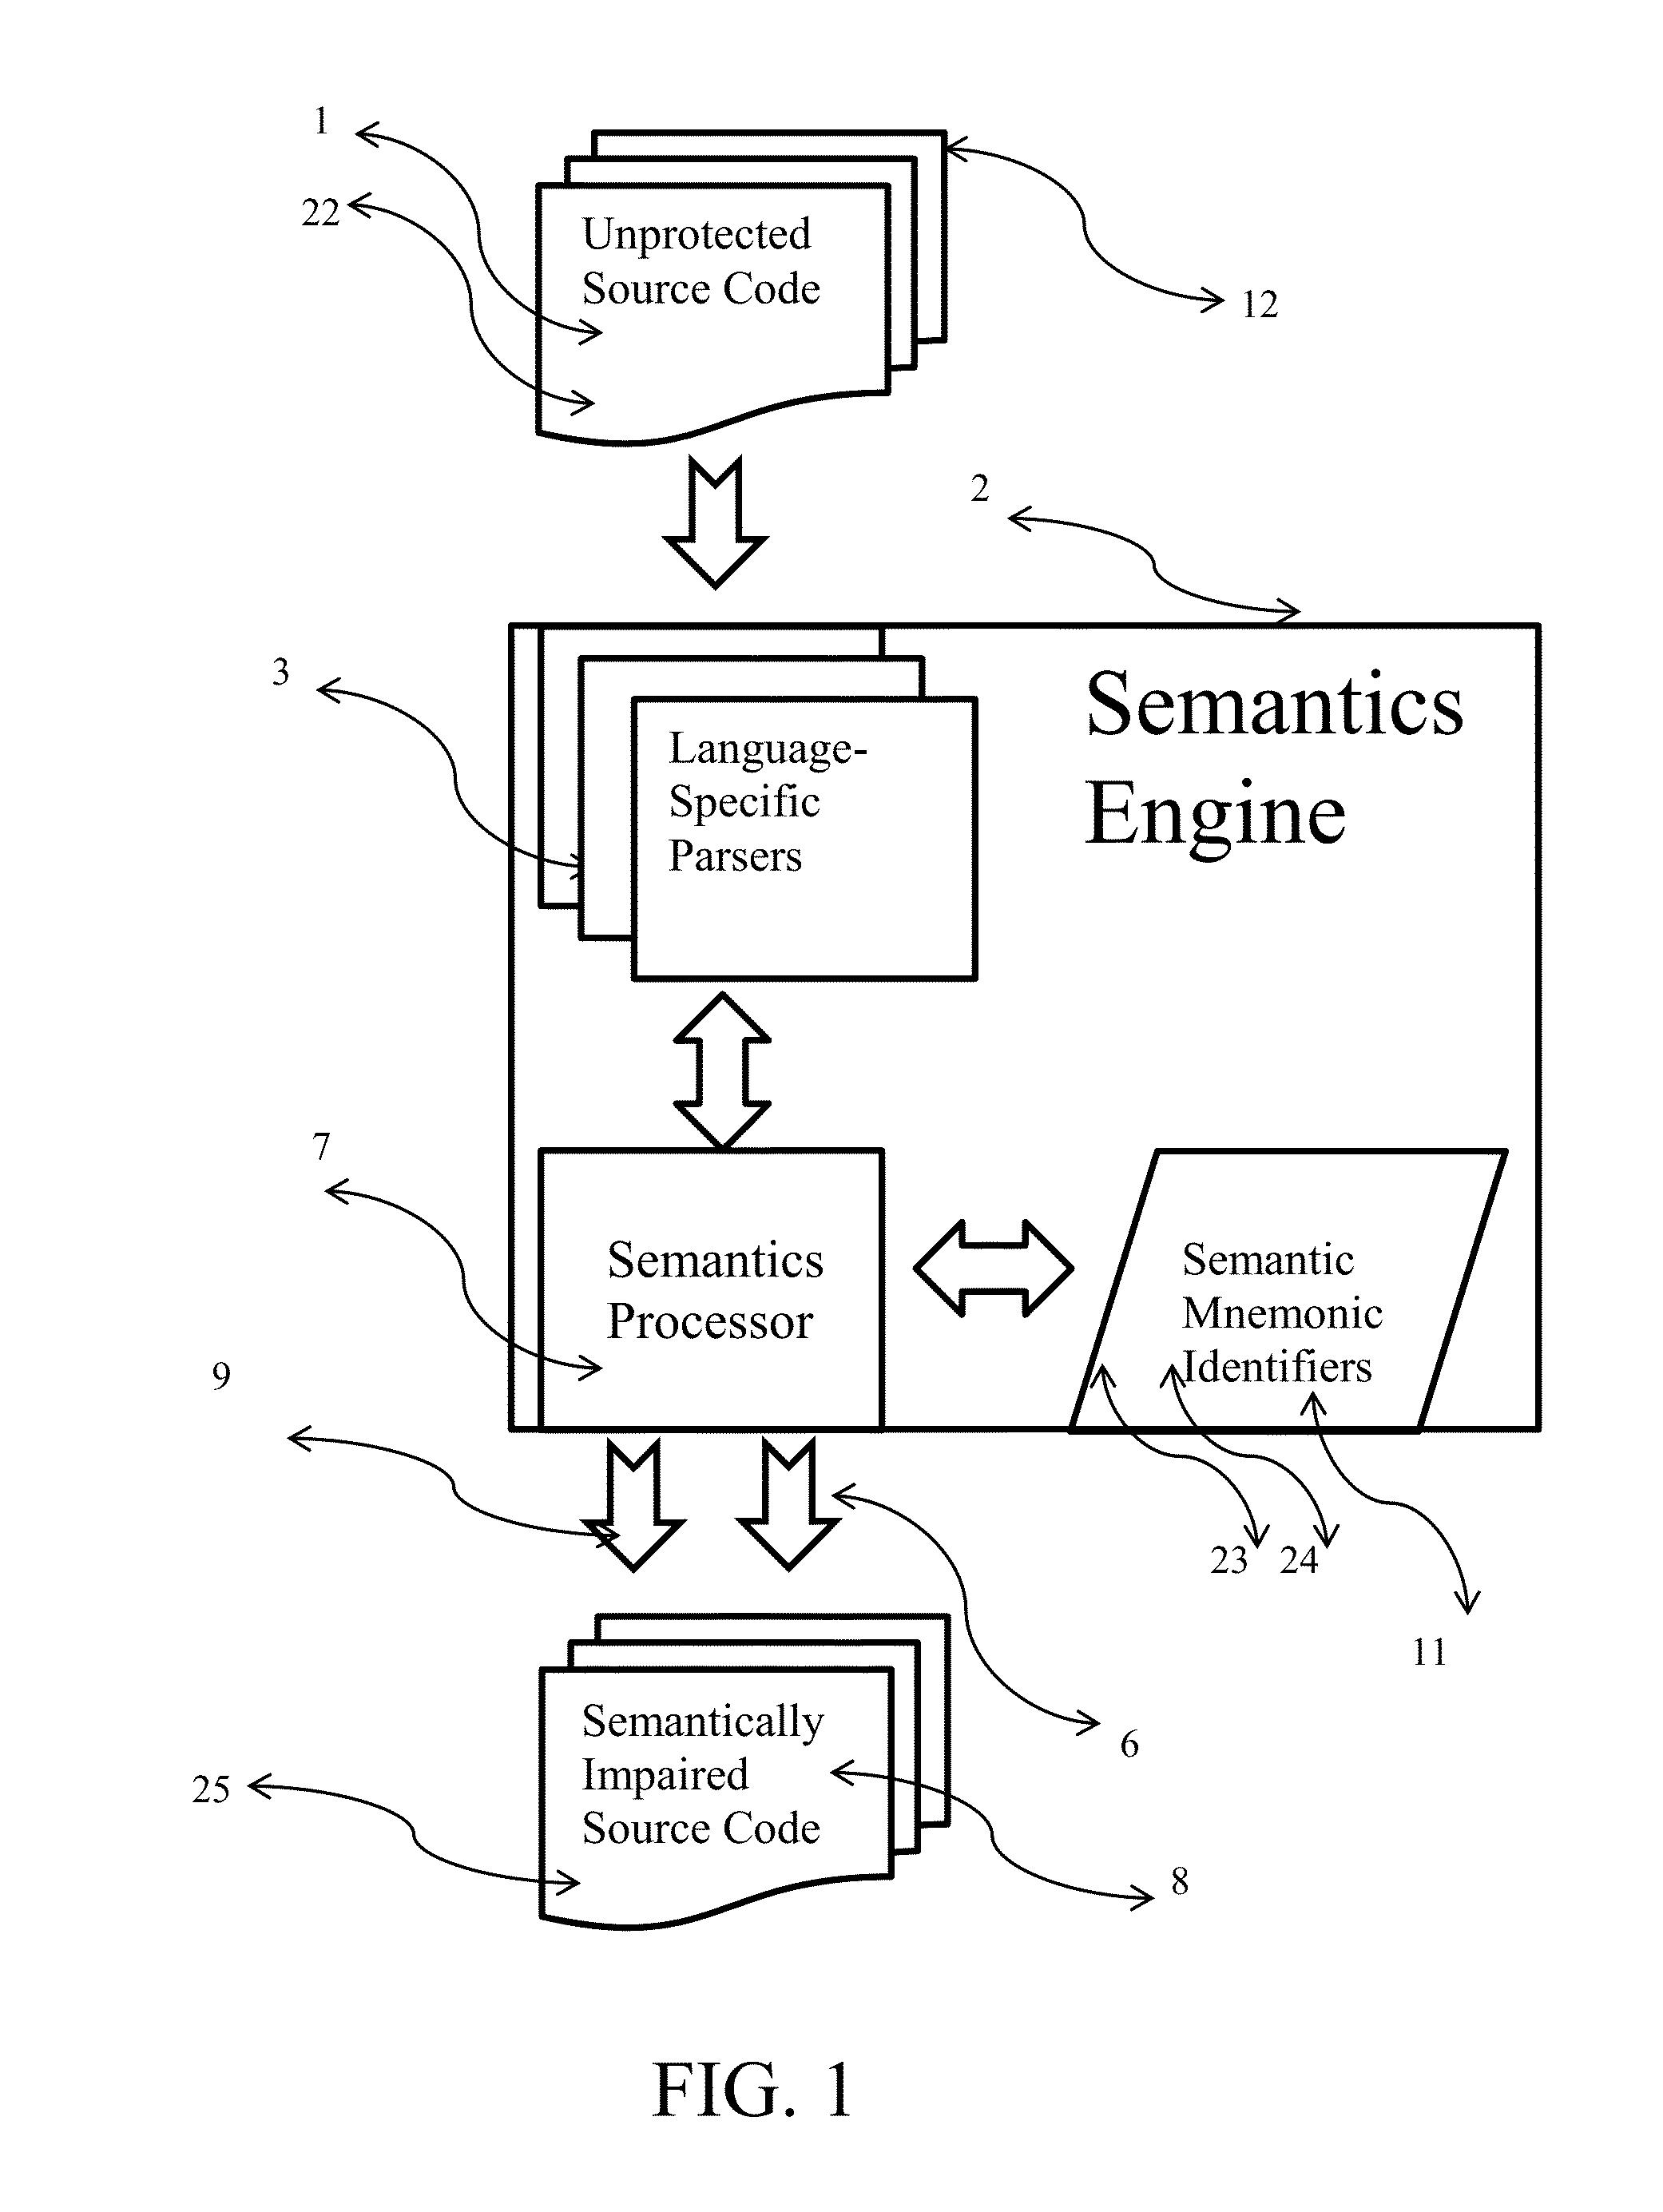 Method for determining and protecting proprietary source code using mnemonic identifiers